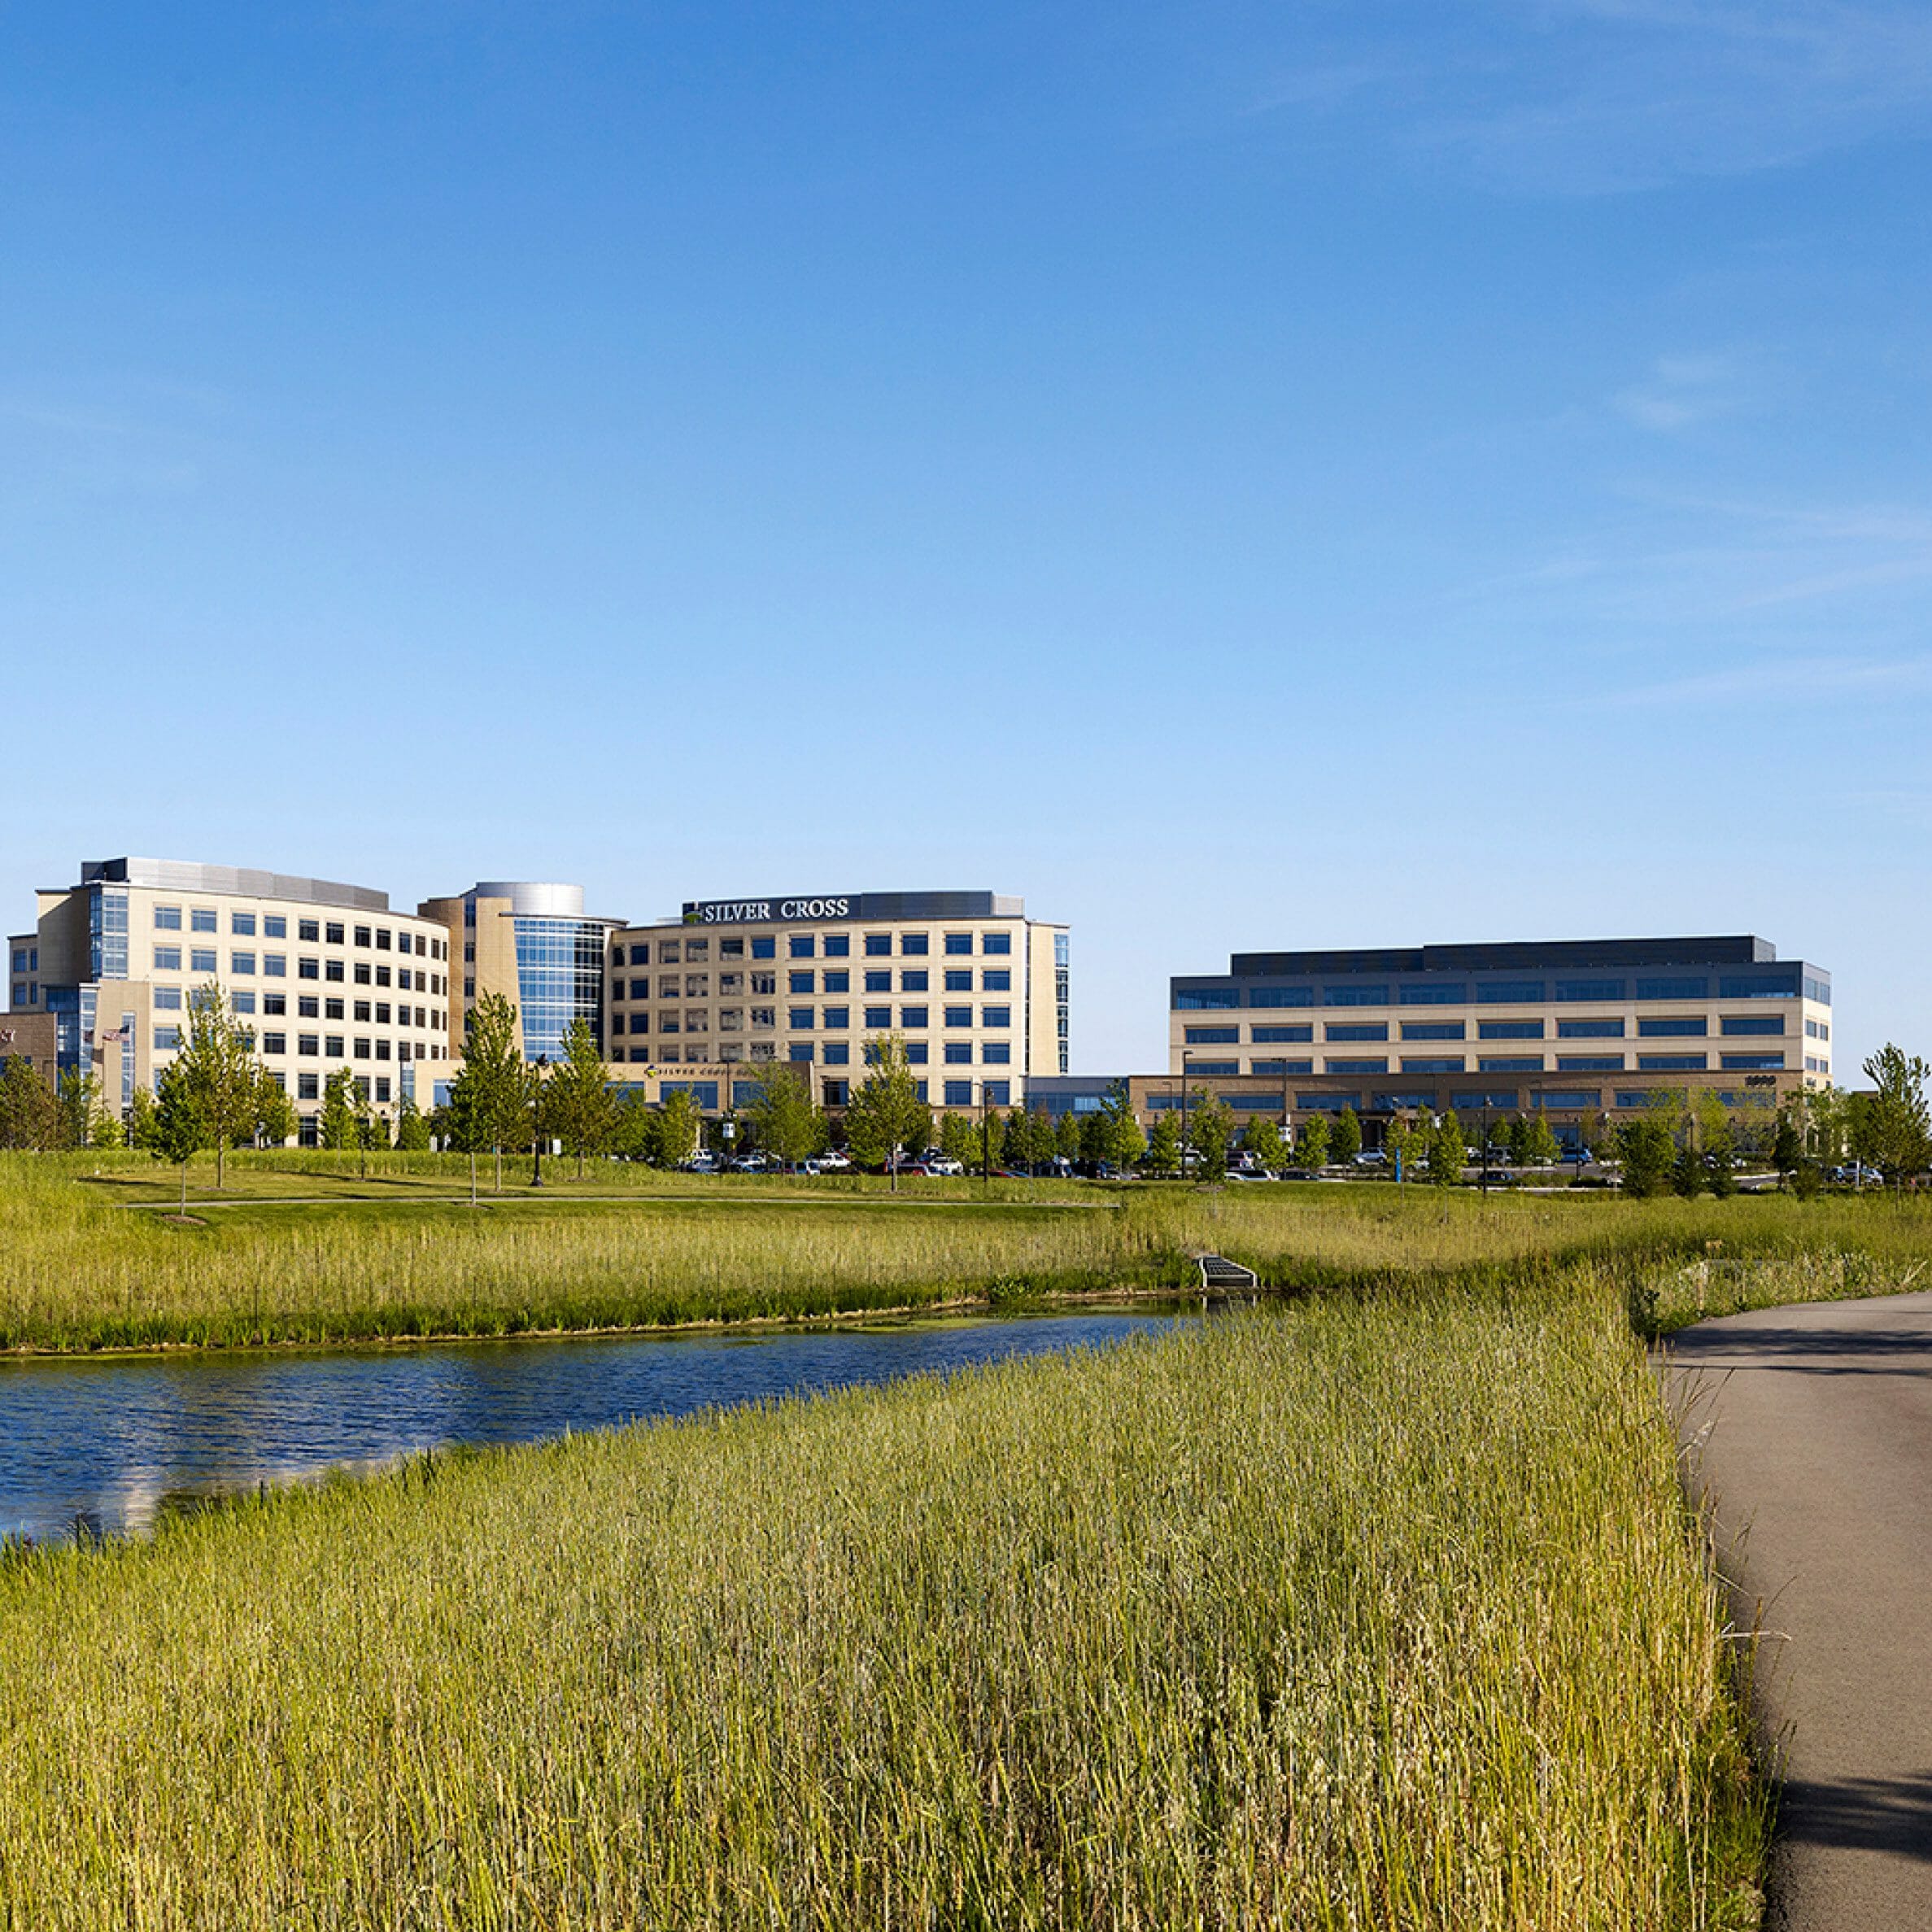 wide shot exterior view of silver cross hospital and medical office building. Pond, greenery and trails